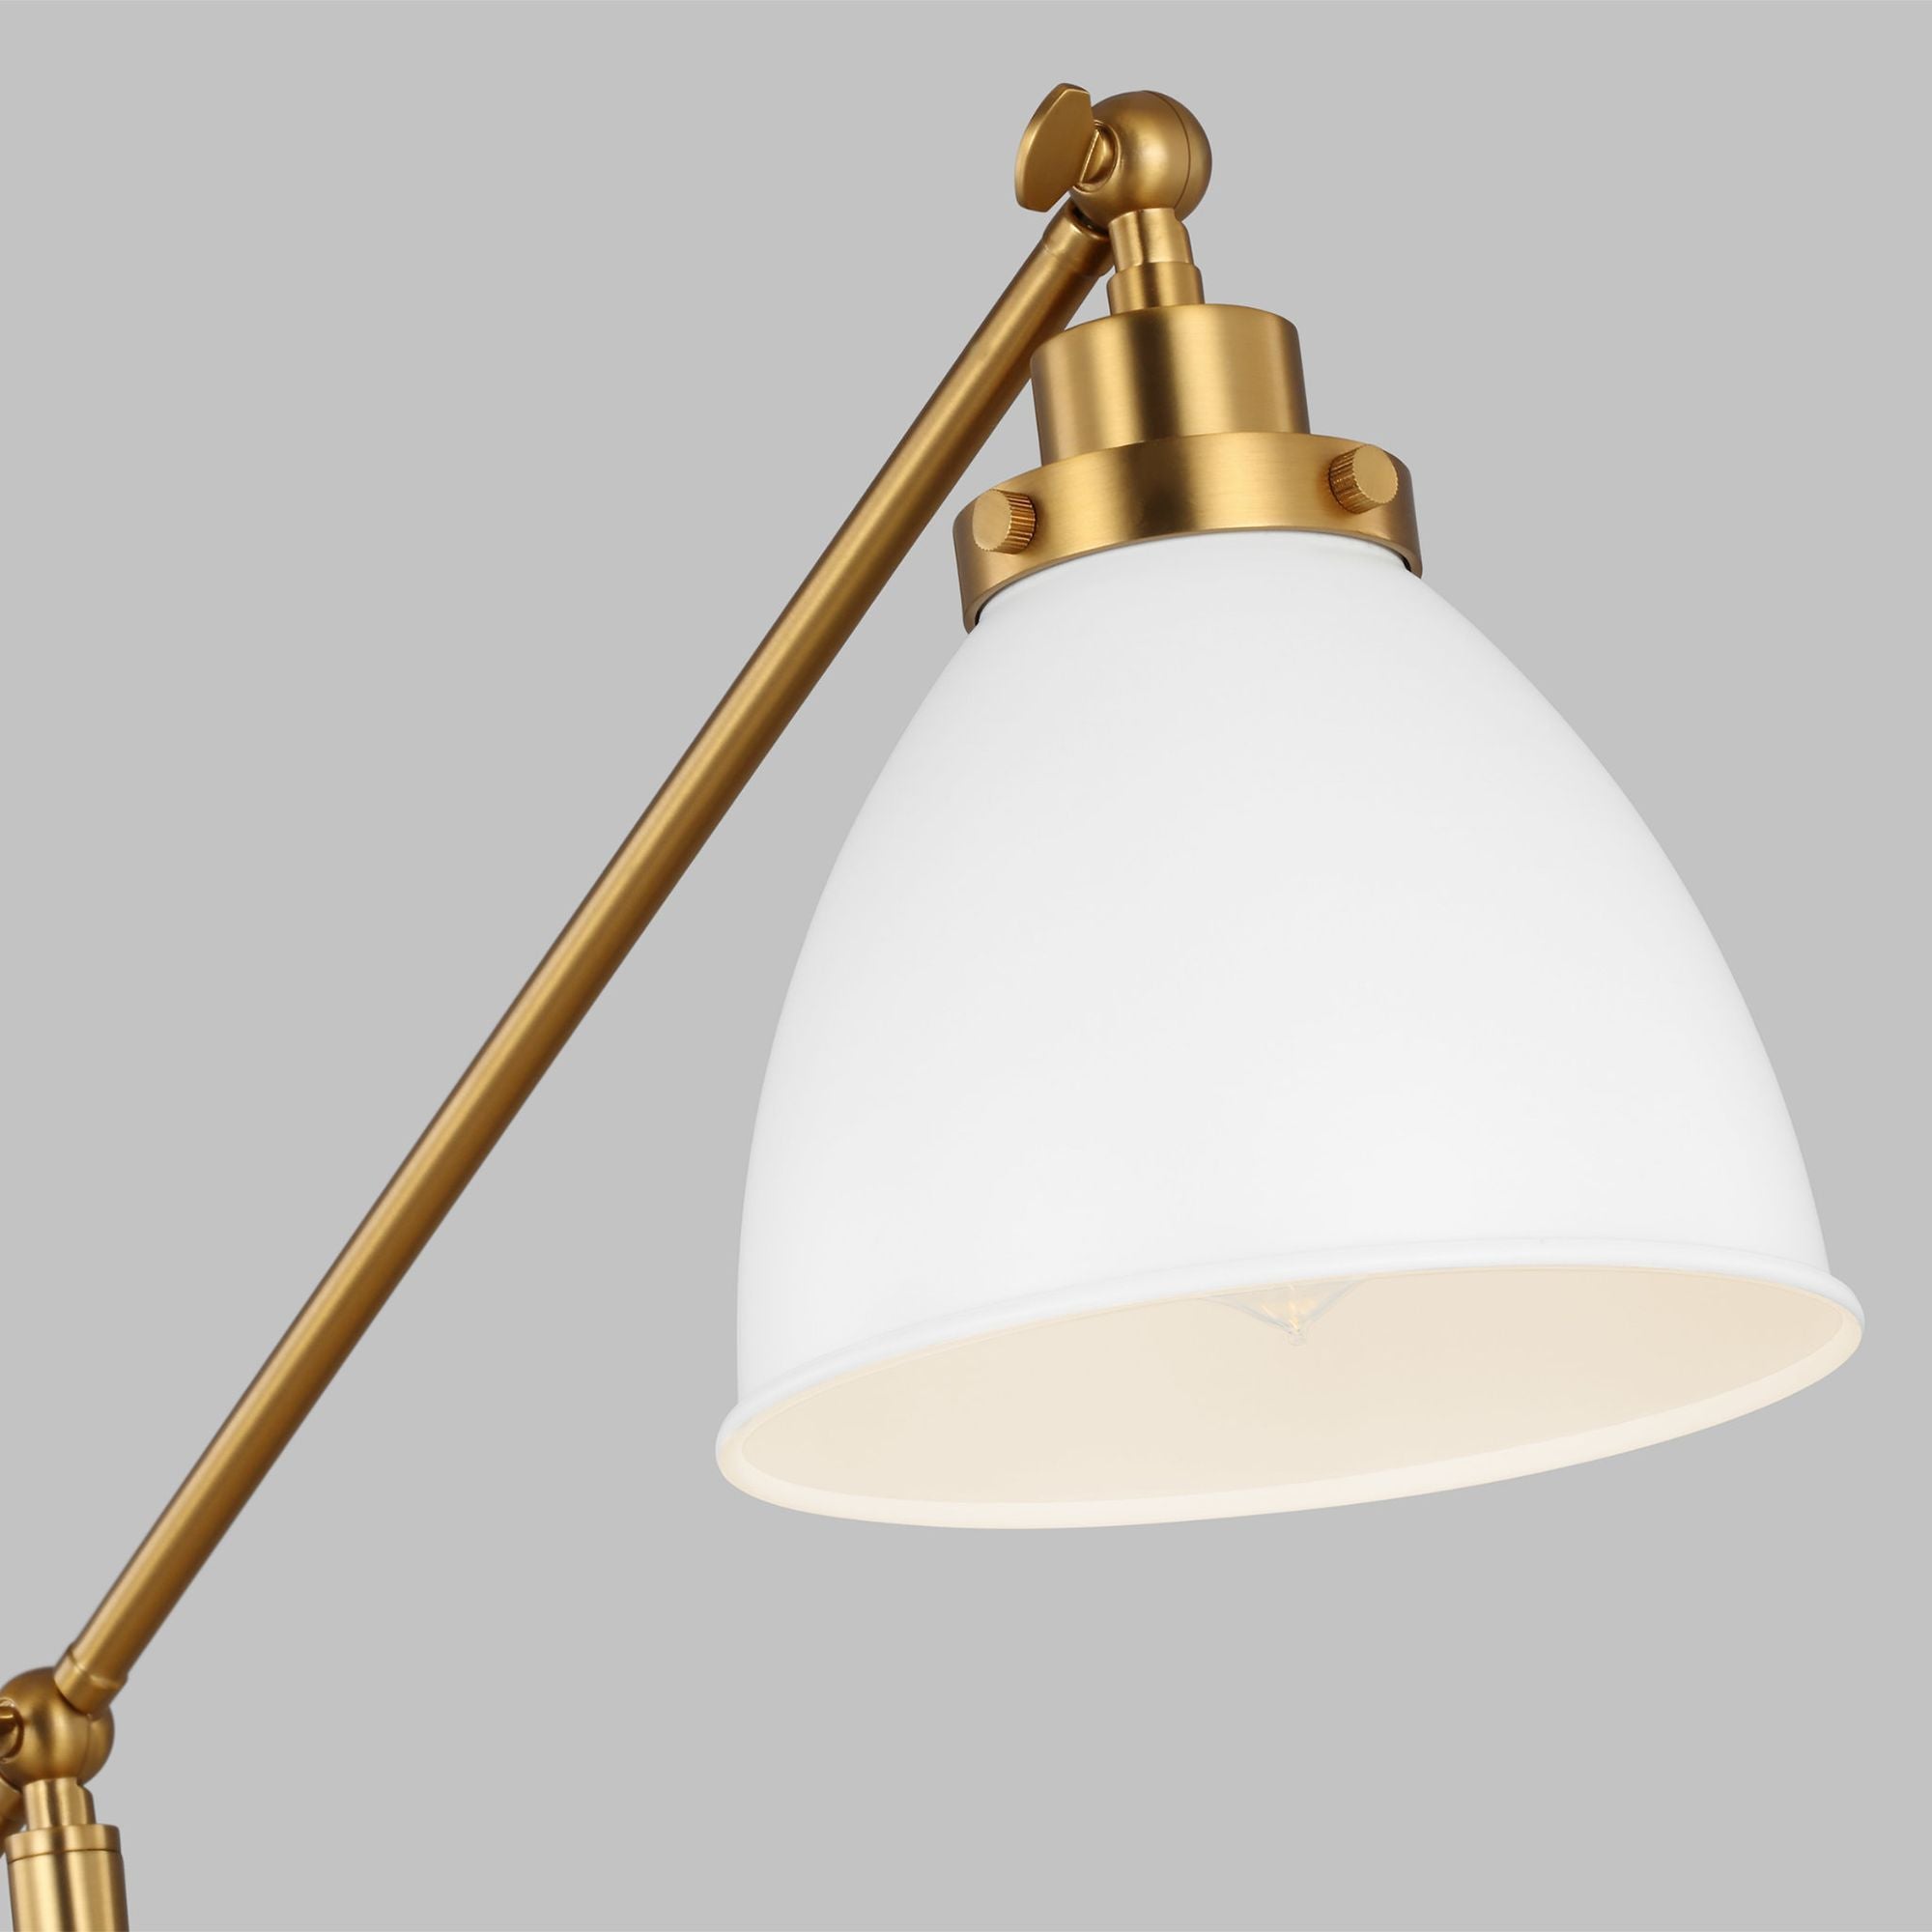 Chapman & Myers Wellfleet Dome Desk Lamp in Matte White and Burnished Brass